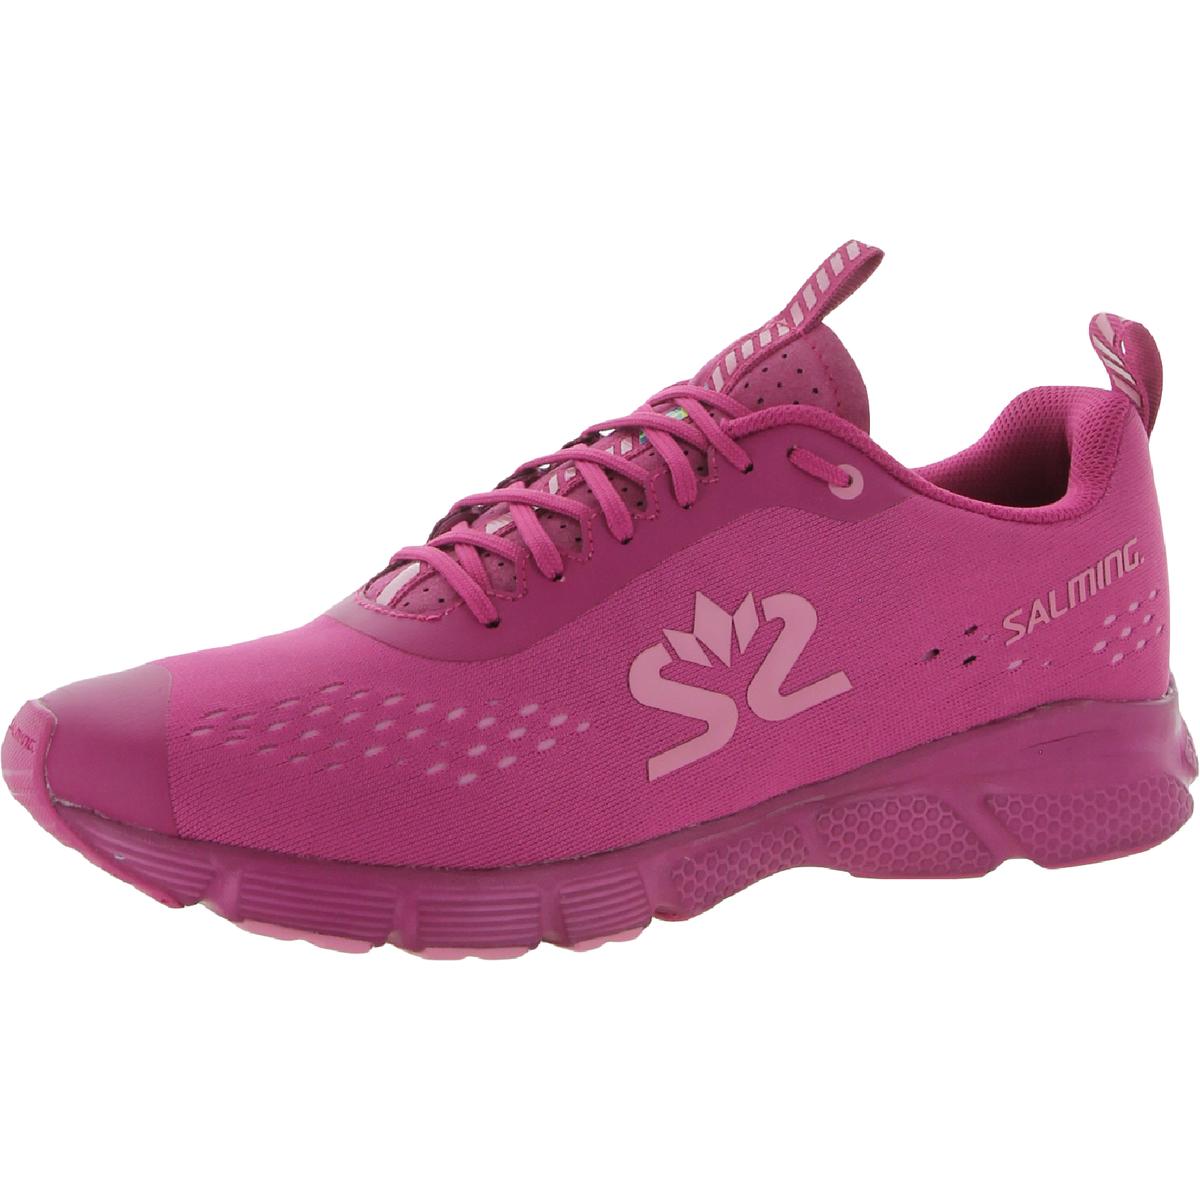 Salming Enroute 3 Womens Fitness Lace Up Athletic and Training Shoes